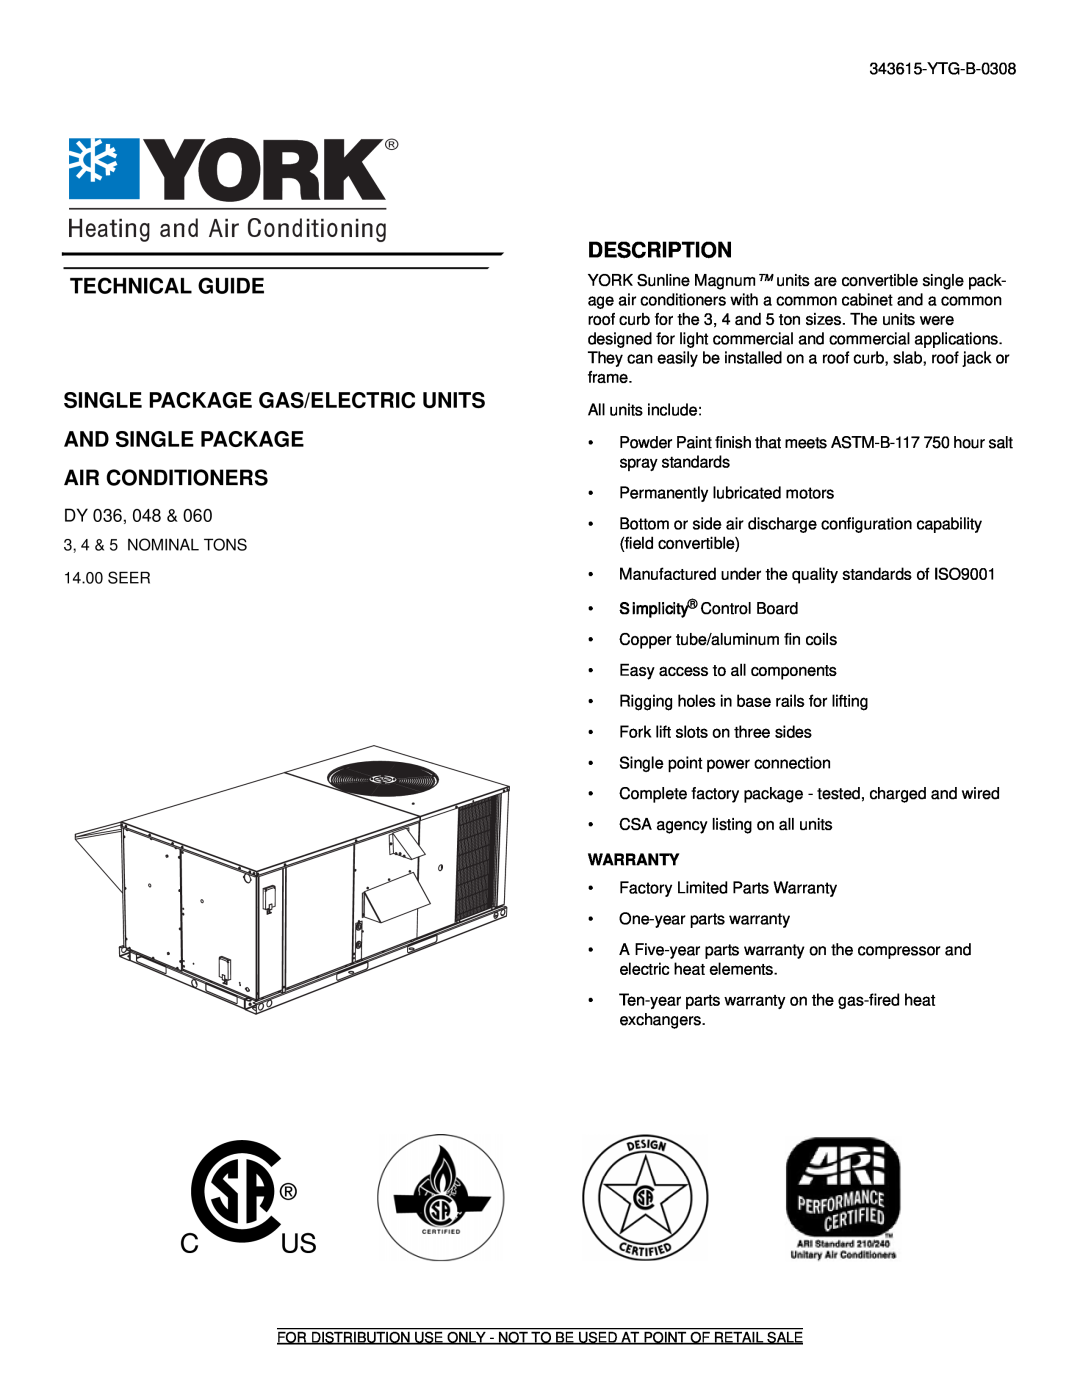 York DY 048, DY 060 warranty Technical Guide, Air Conditioners, Description, Dy 